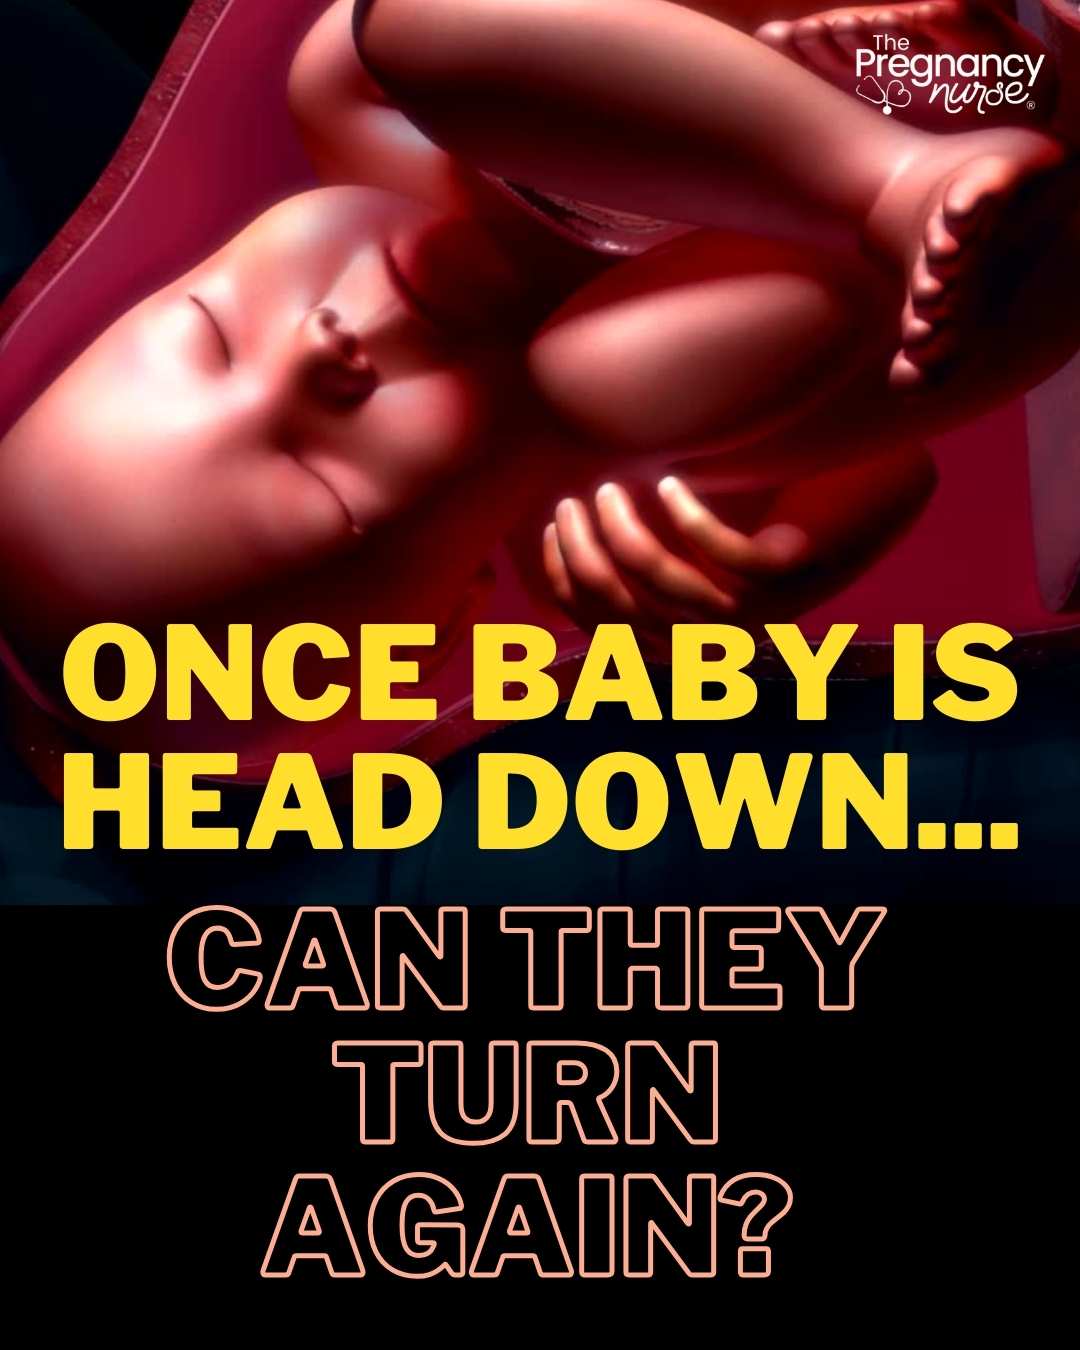 Having your baby in the head down position during the end of your pregnancy is an important step in having a healthy delivery. However, once they are positioned this way, you may be wondering if they can still turn again. The answer is yes! While the likelihood of your baby turning again decreases as you near your estimated due date, it's still possible for them to move around and change positions. Be sure to talk to your doctor about any changes you notice - such as an increase or decrease in movement - so that they can assess the situation and provide you with peace of mind.